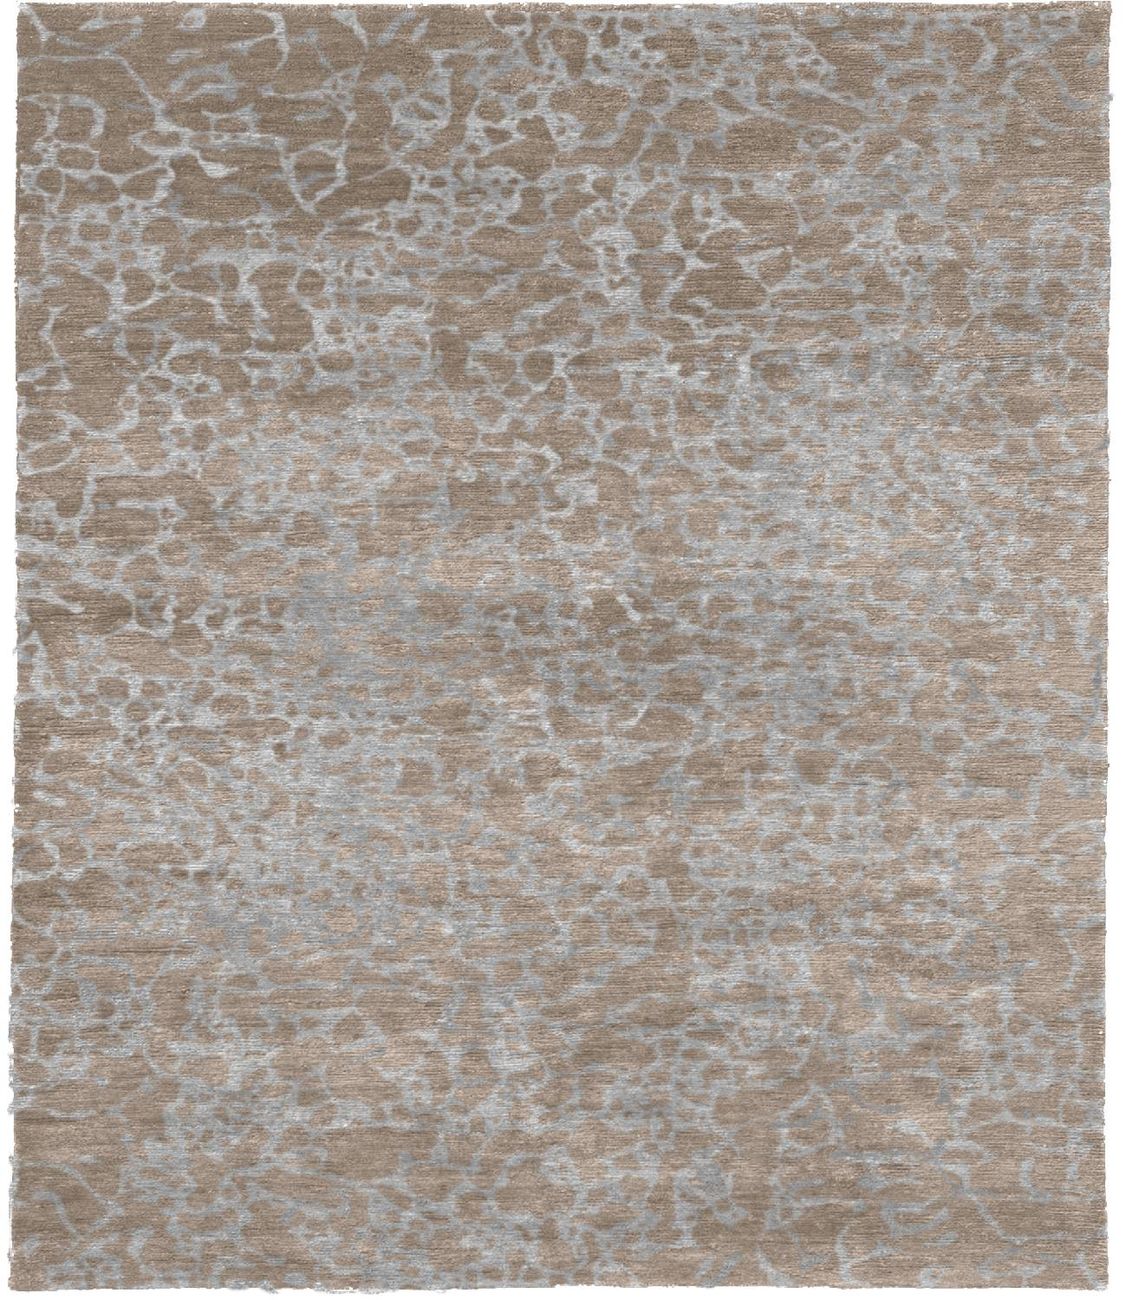 Nitche Silk Wool Hand Knotted Tibetan Rug Product Image